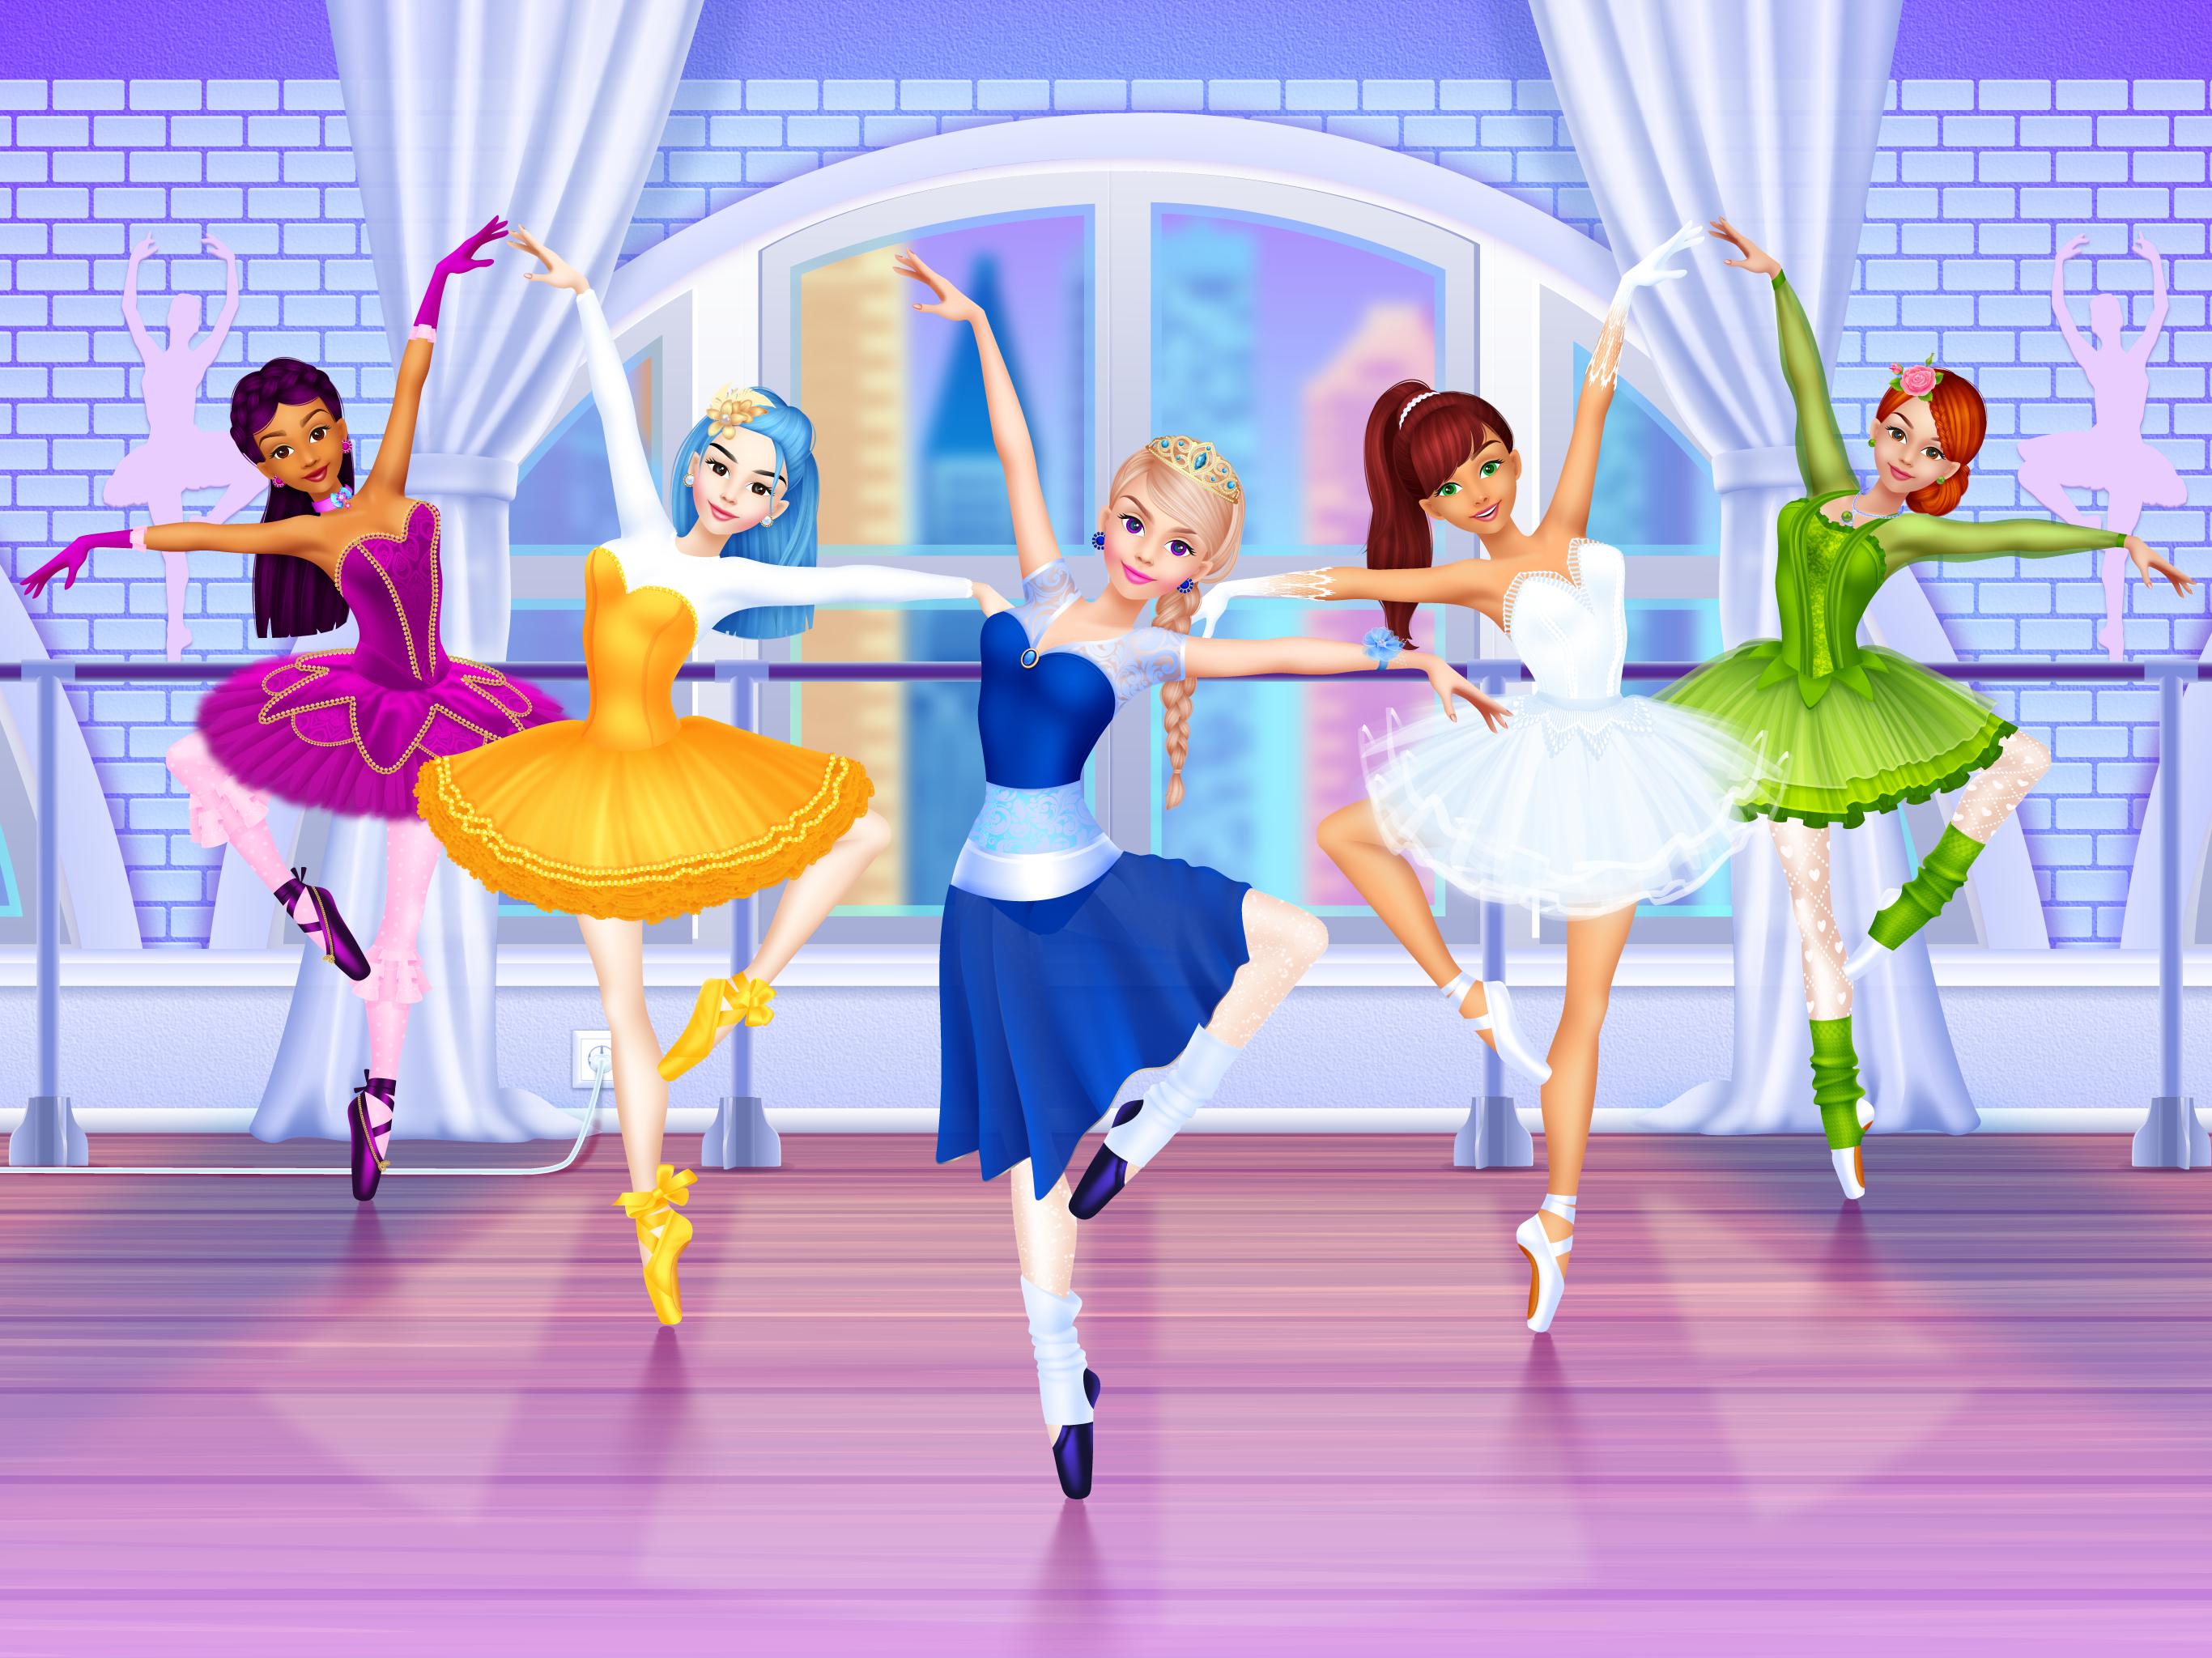 Ballerina for Android - APK Download